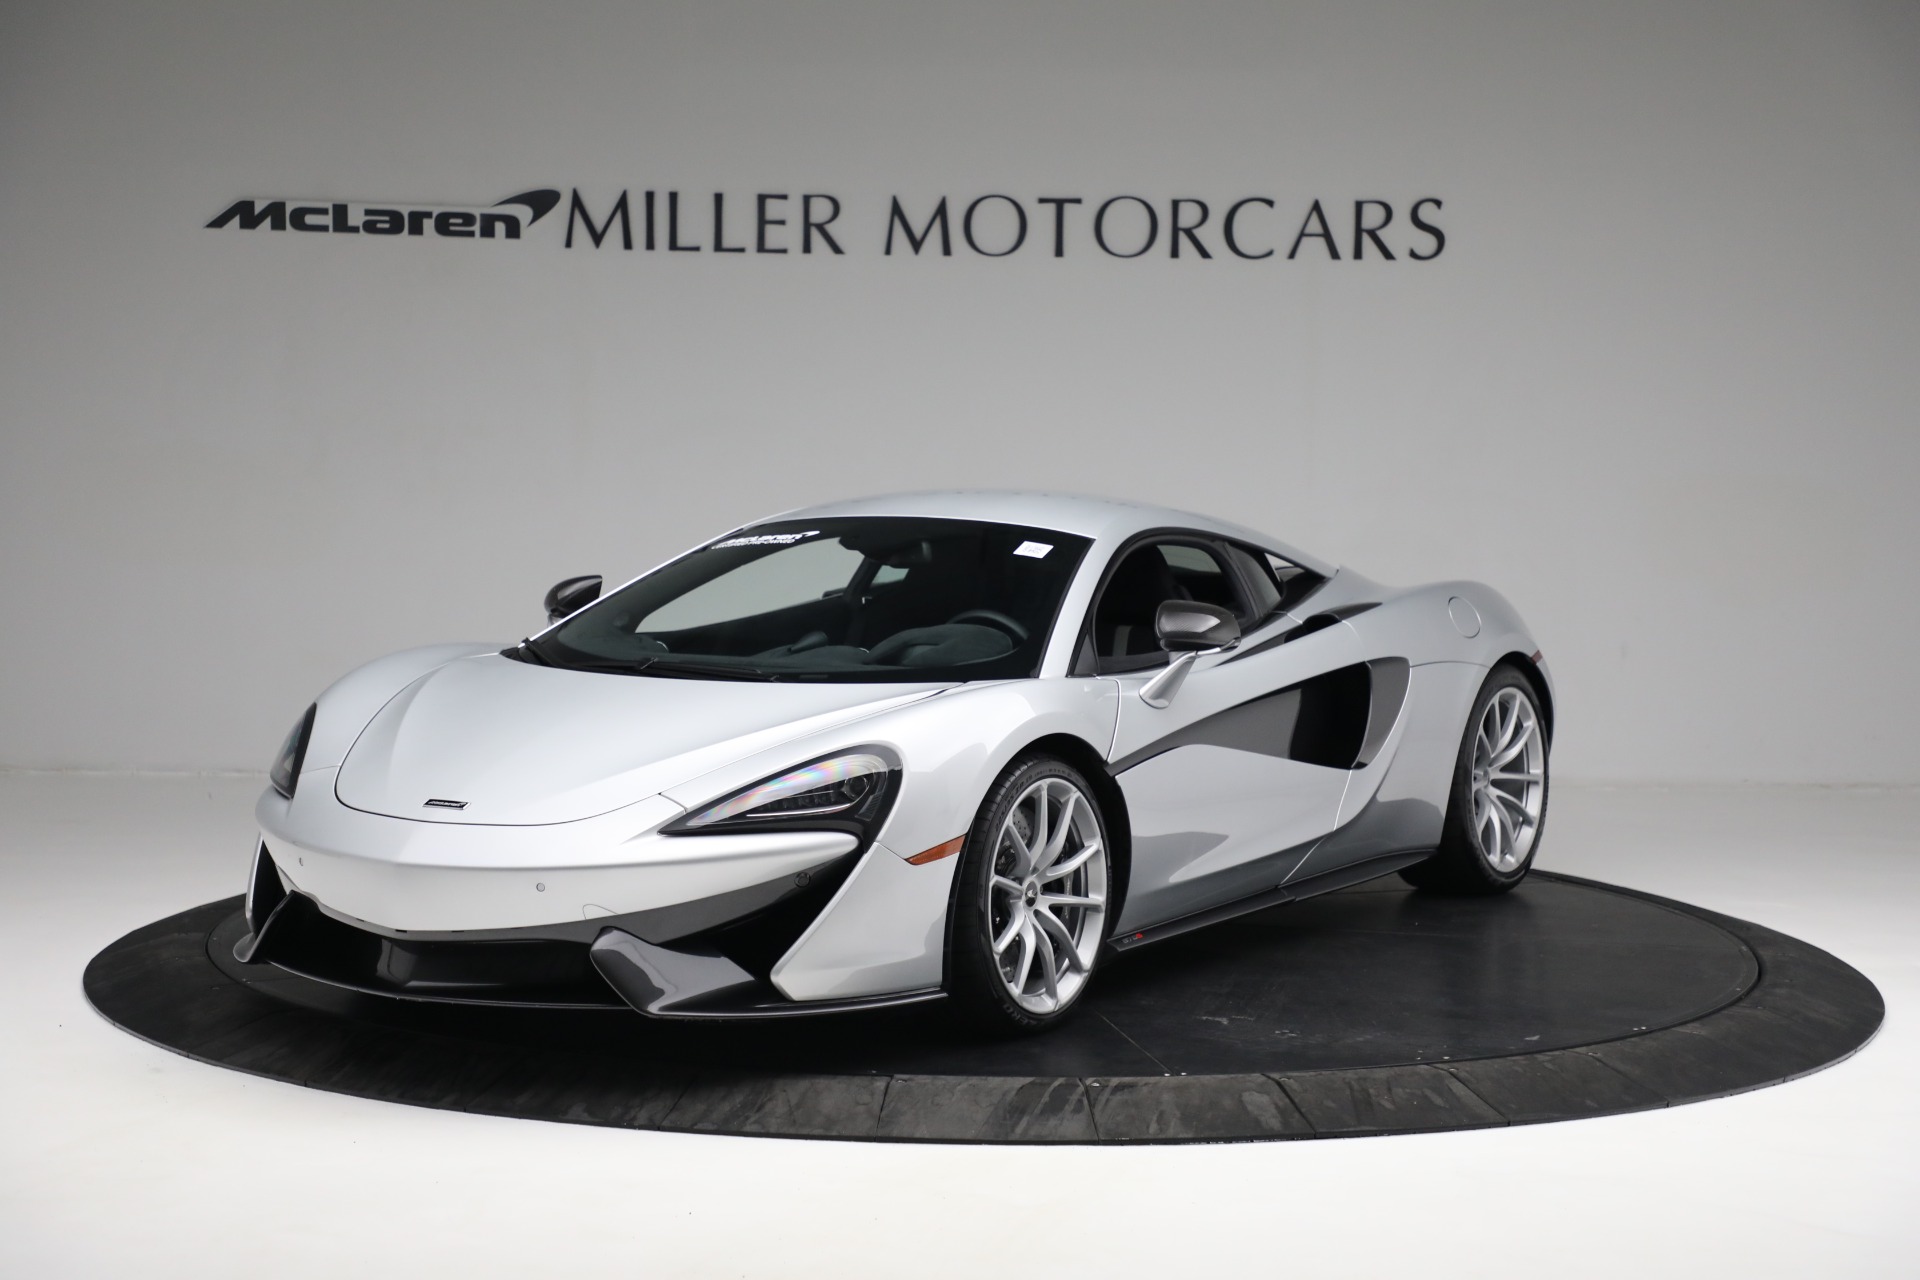 Used 2019 McLaren 570S for sale Sold at Bentley Greenwich in Greenwich CT 06830 1